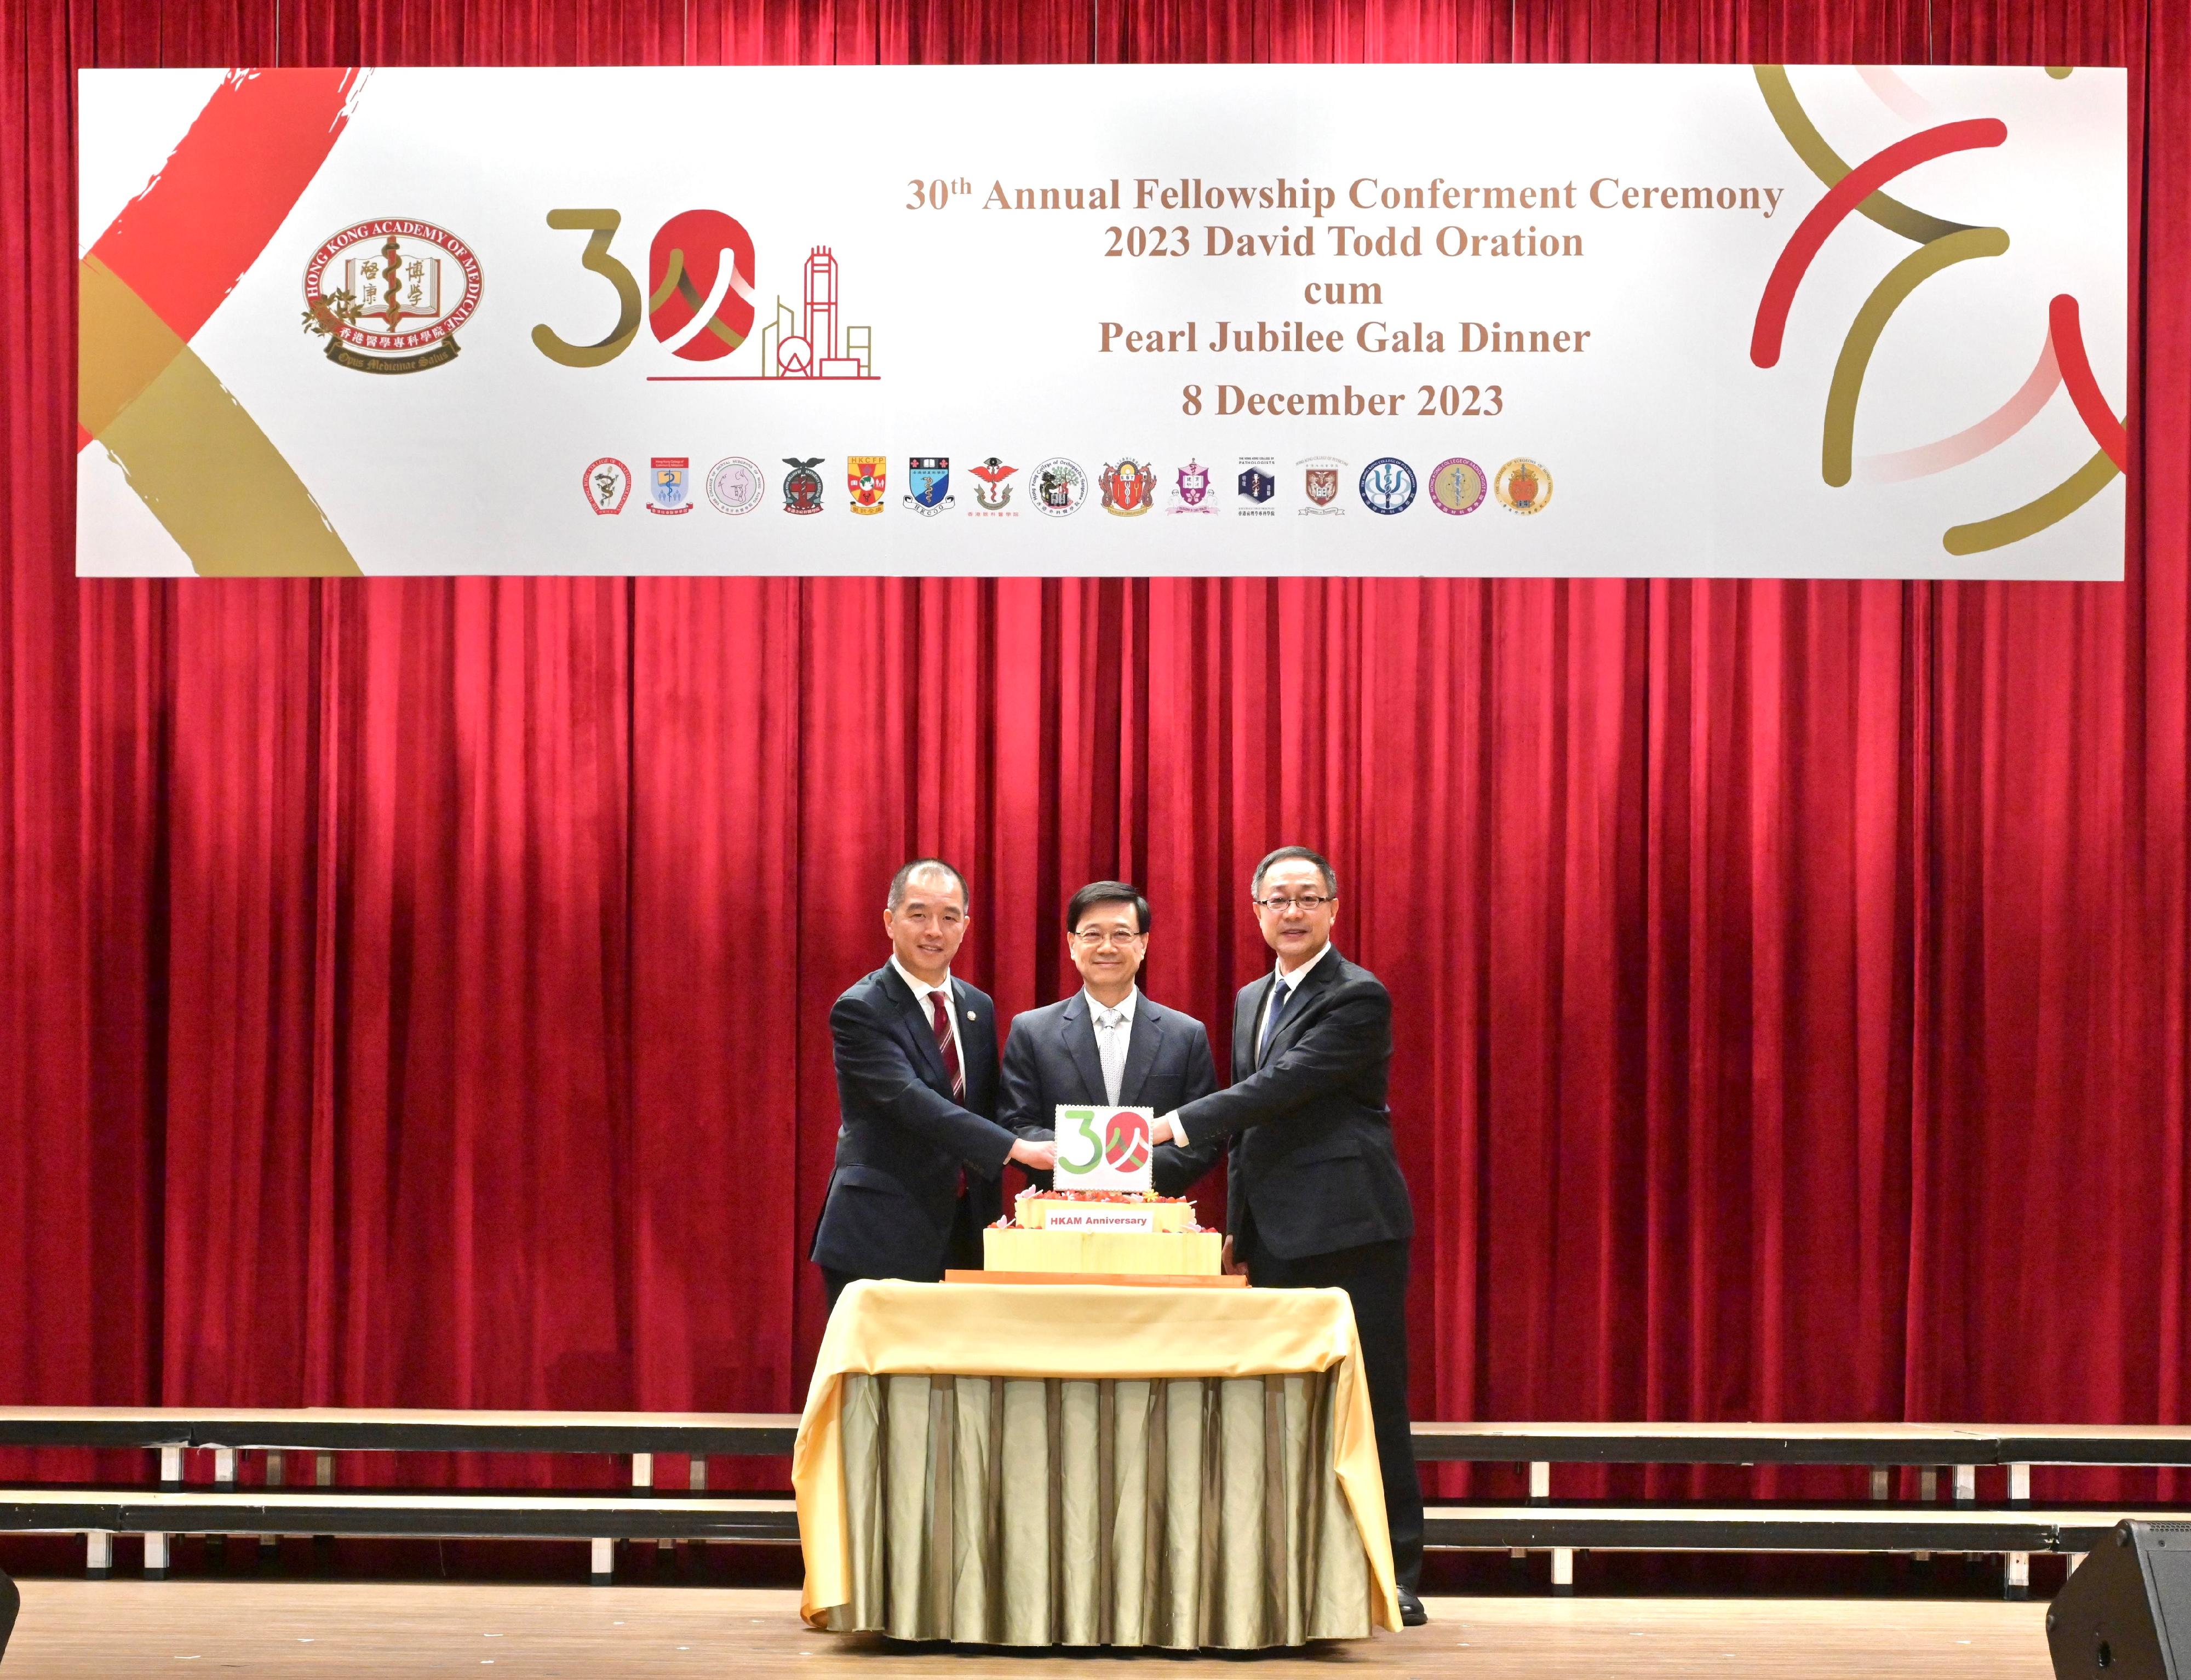 The Chief Executive, Mr John Lee, attended the Hong Kong Academy of Medicine Pearl Jubilee Gala Dinner today (December 8). Photo shows Mr Lee (centre); the President of the Hong Kong Academy of Medicine, Professor Gilberto Leung (left); and Vice-Minister of the National Health Commission Mr Yu Xuejun (right) at the cake-cutting ceremony.